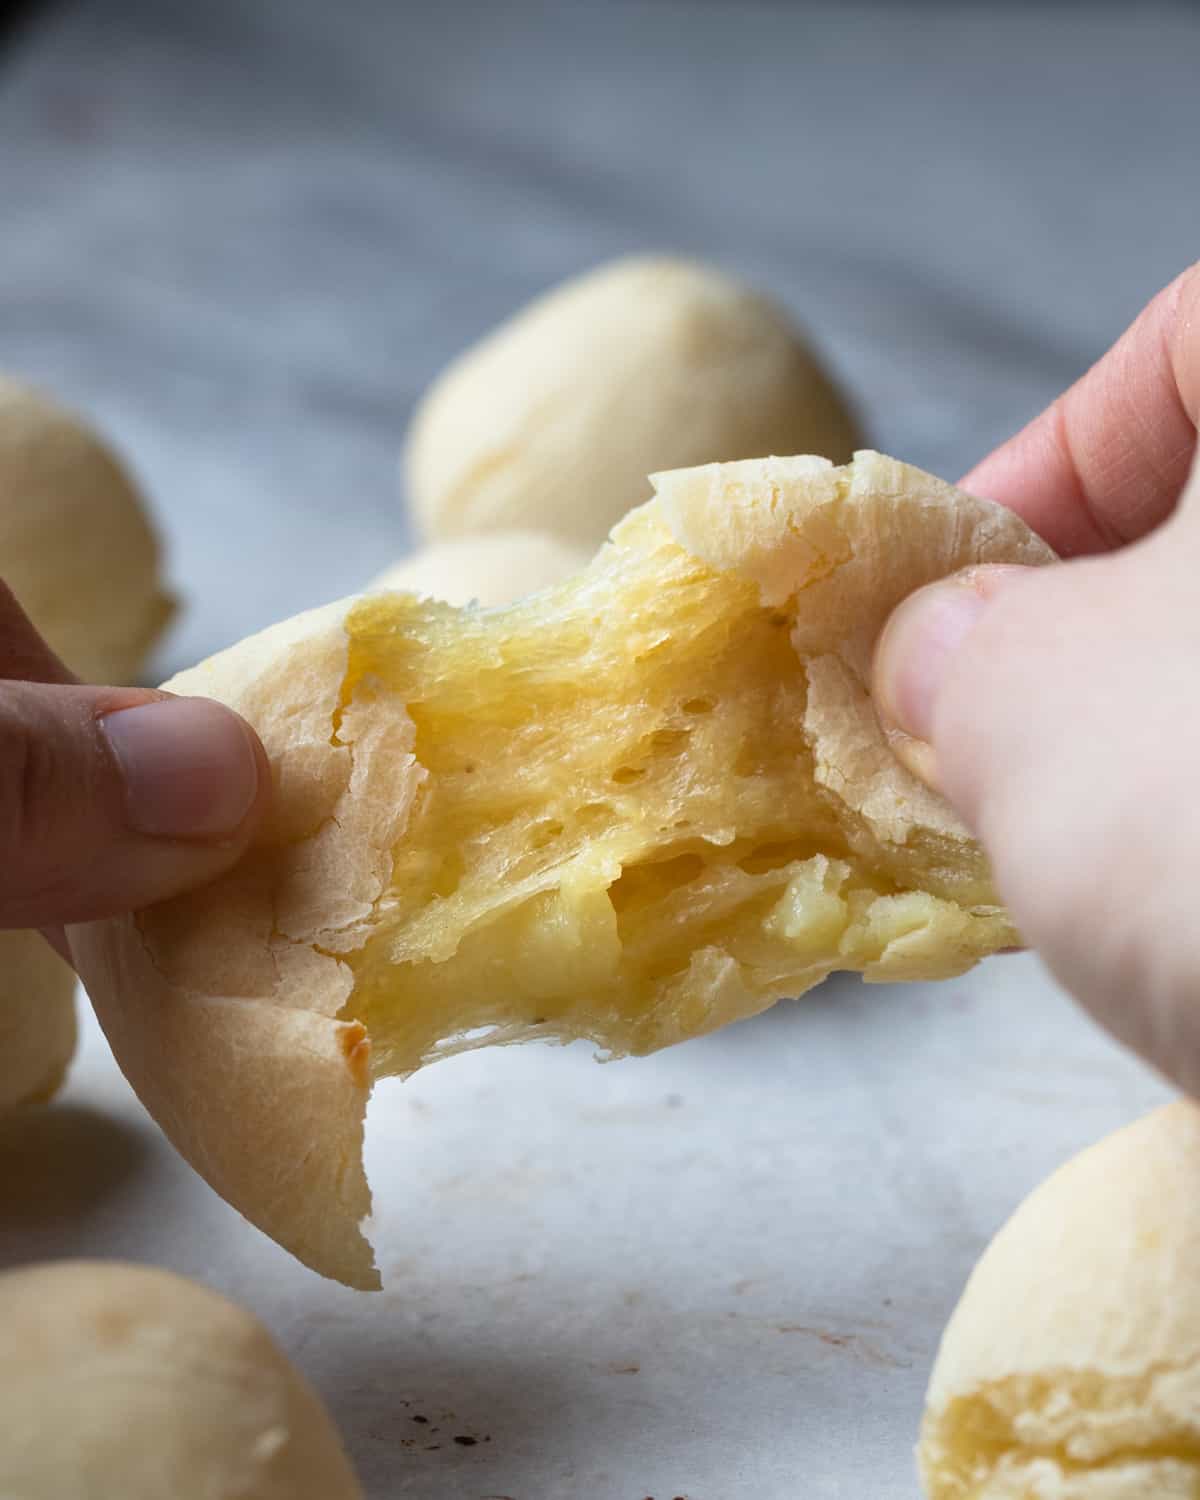 Image of a vegan pao de queijo being strecthed apart to show the stretchy interior of the finished and baked recipe.